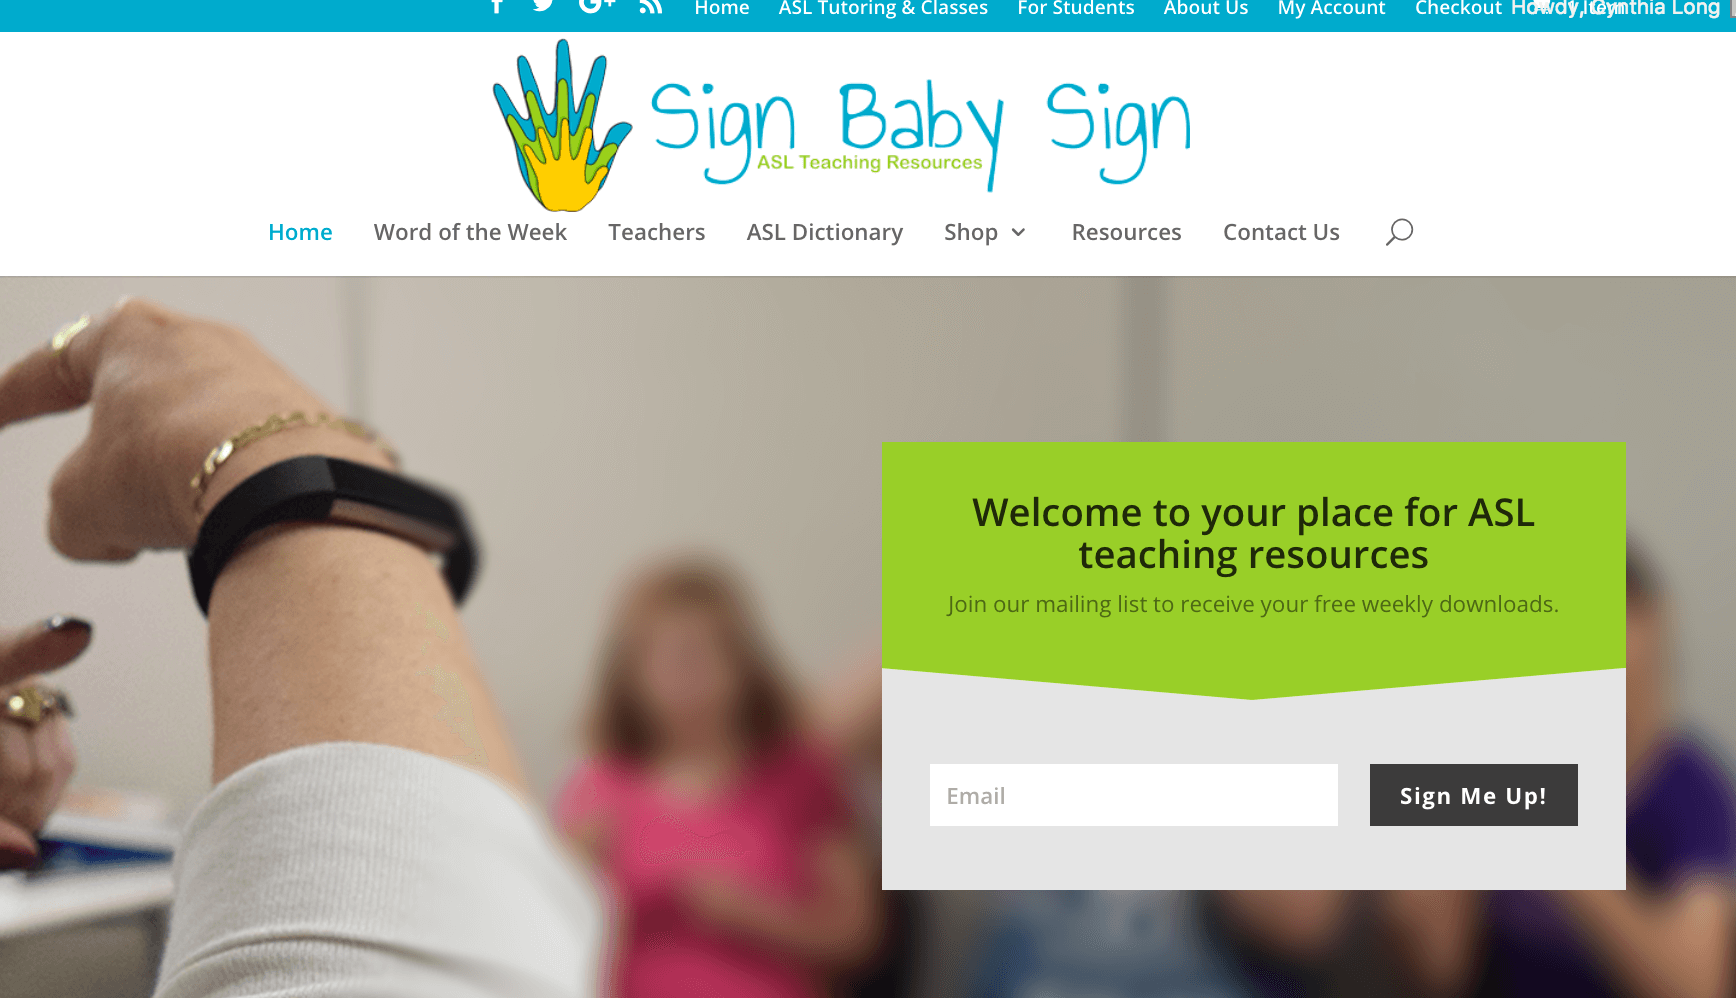 Sign up newsletter for ASL teaching resources